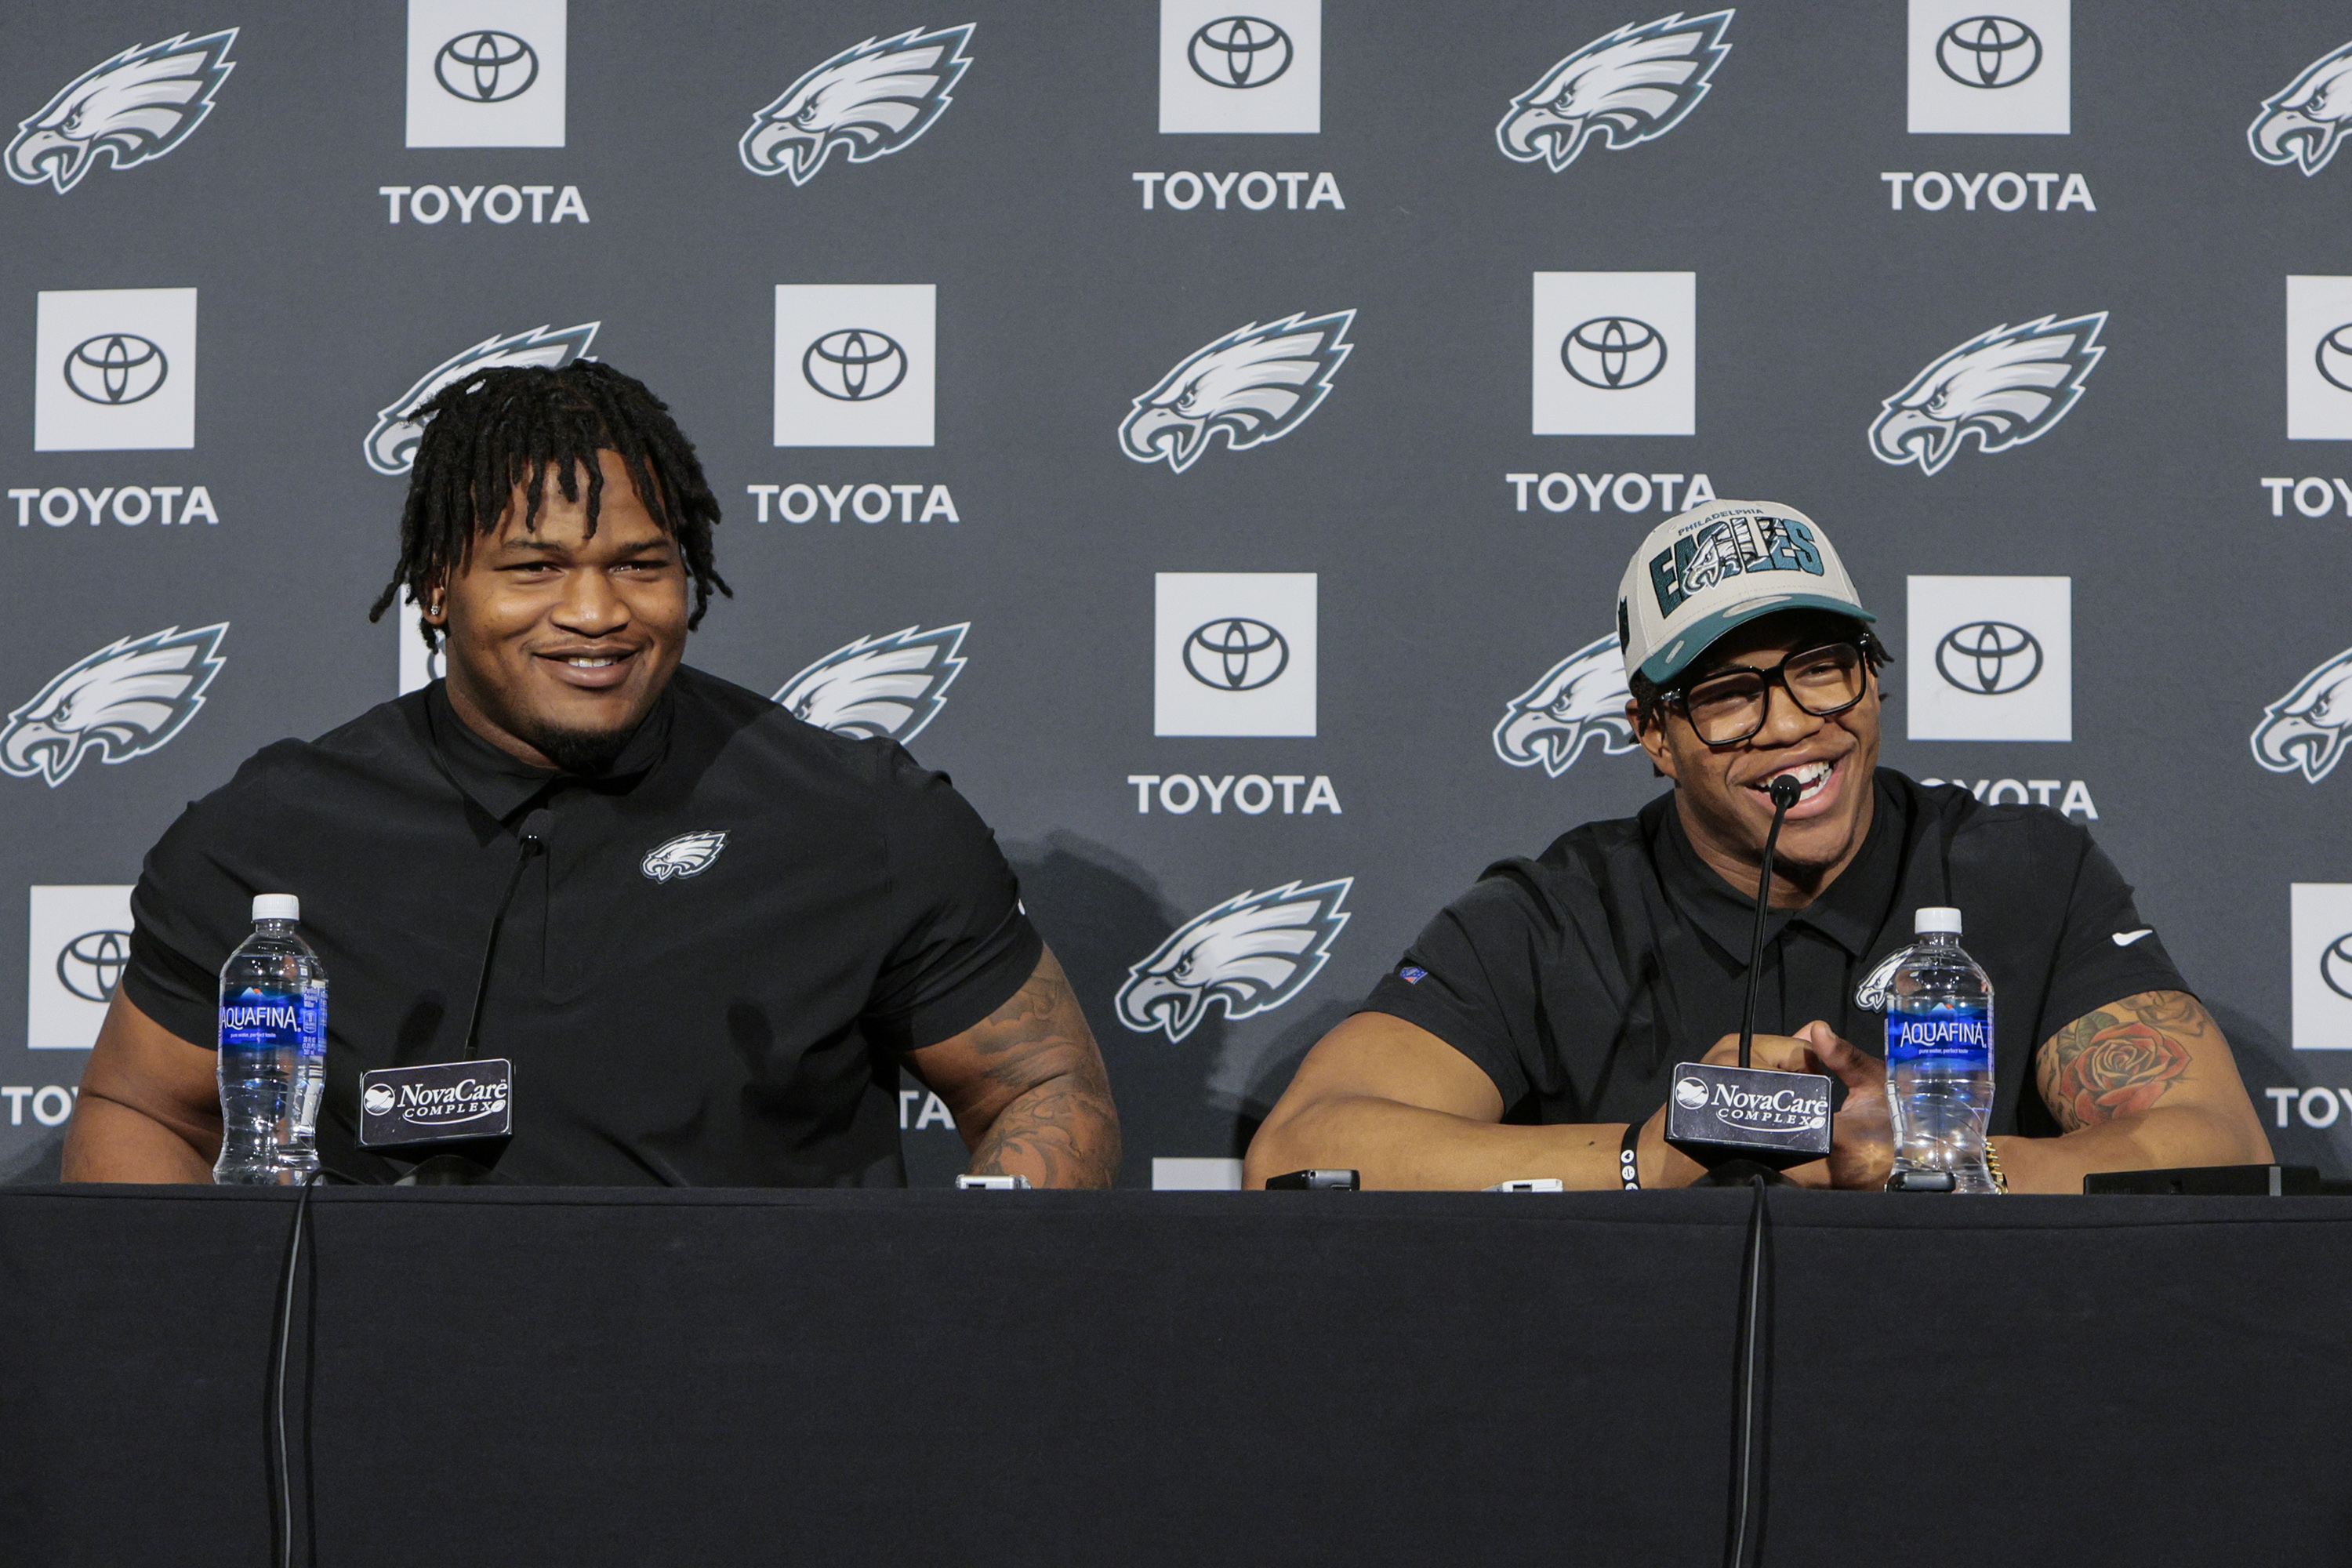 Eagles announce jersey numbers for their 2022 draft class – Philly